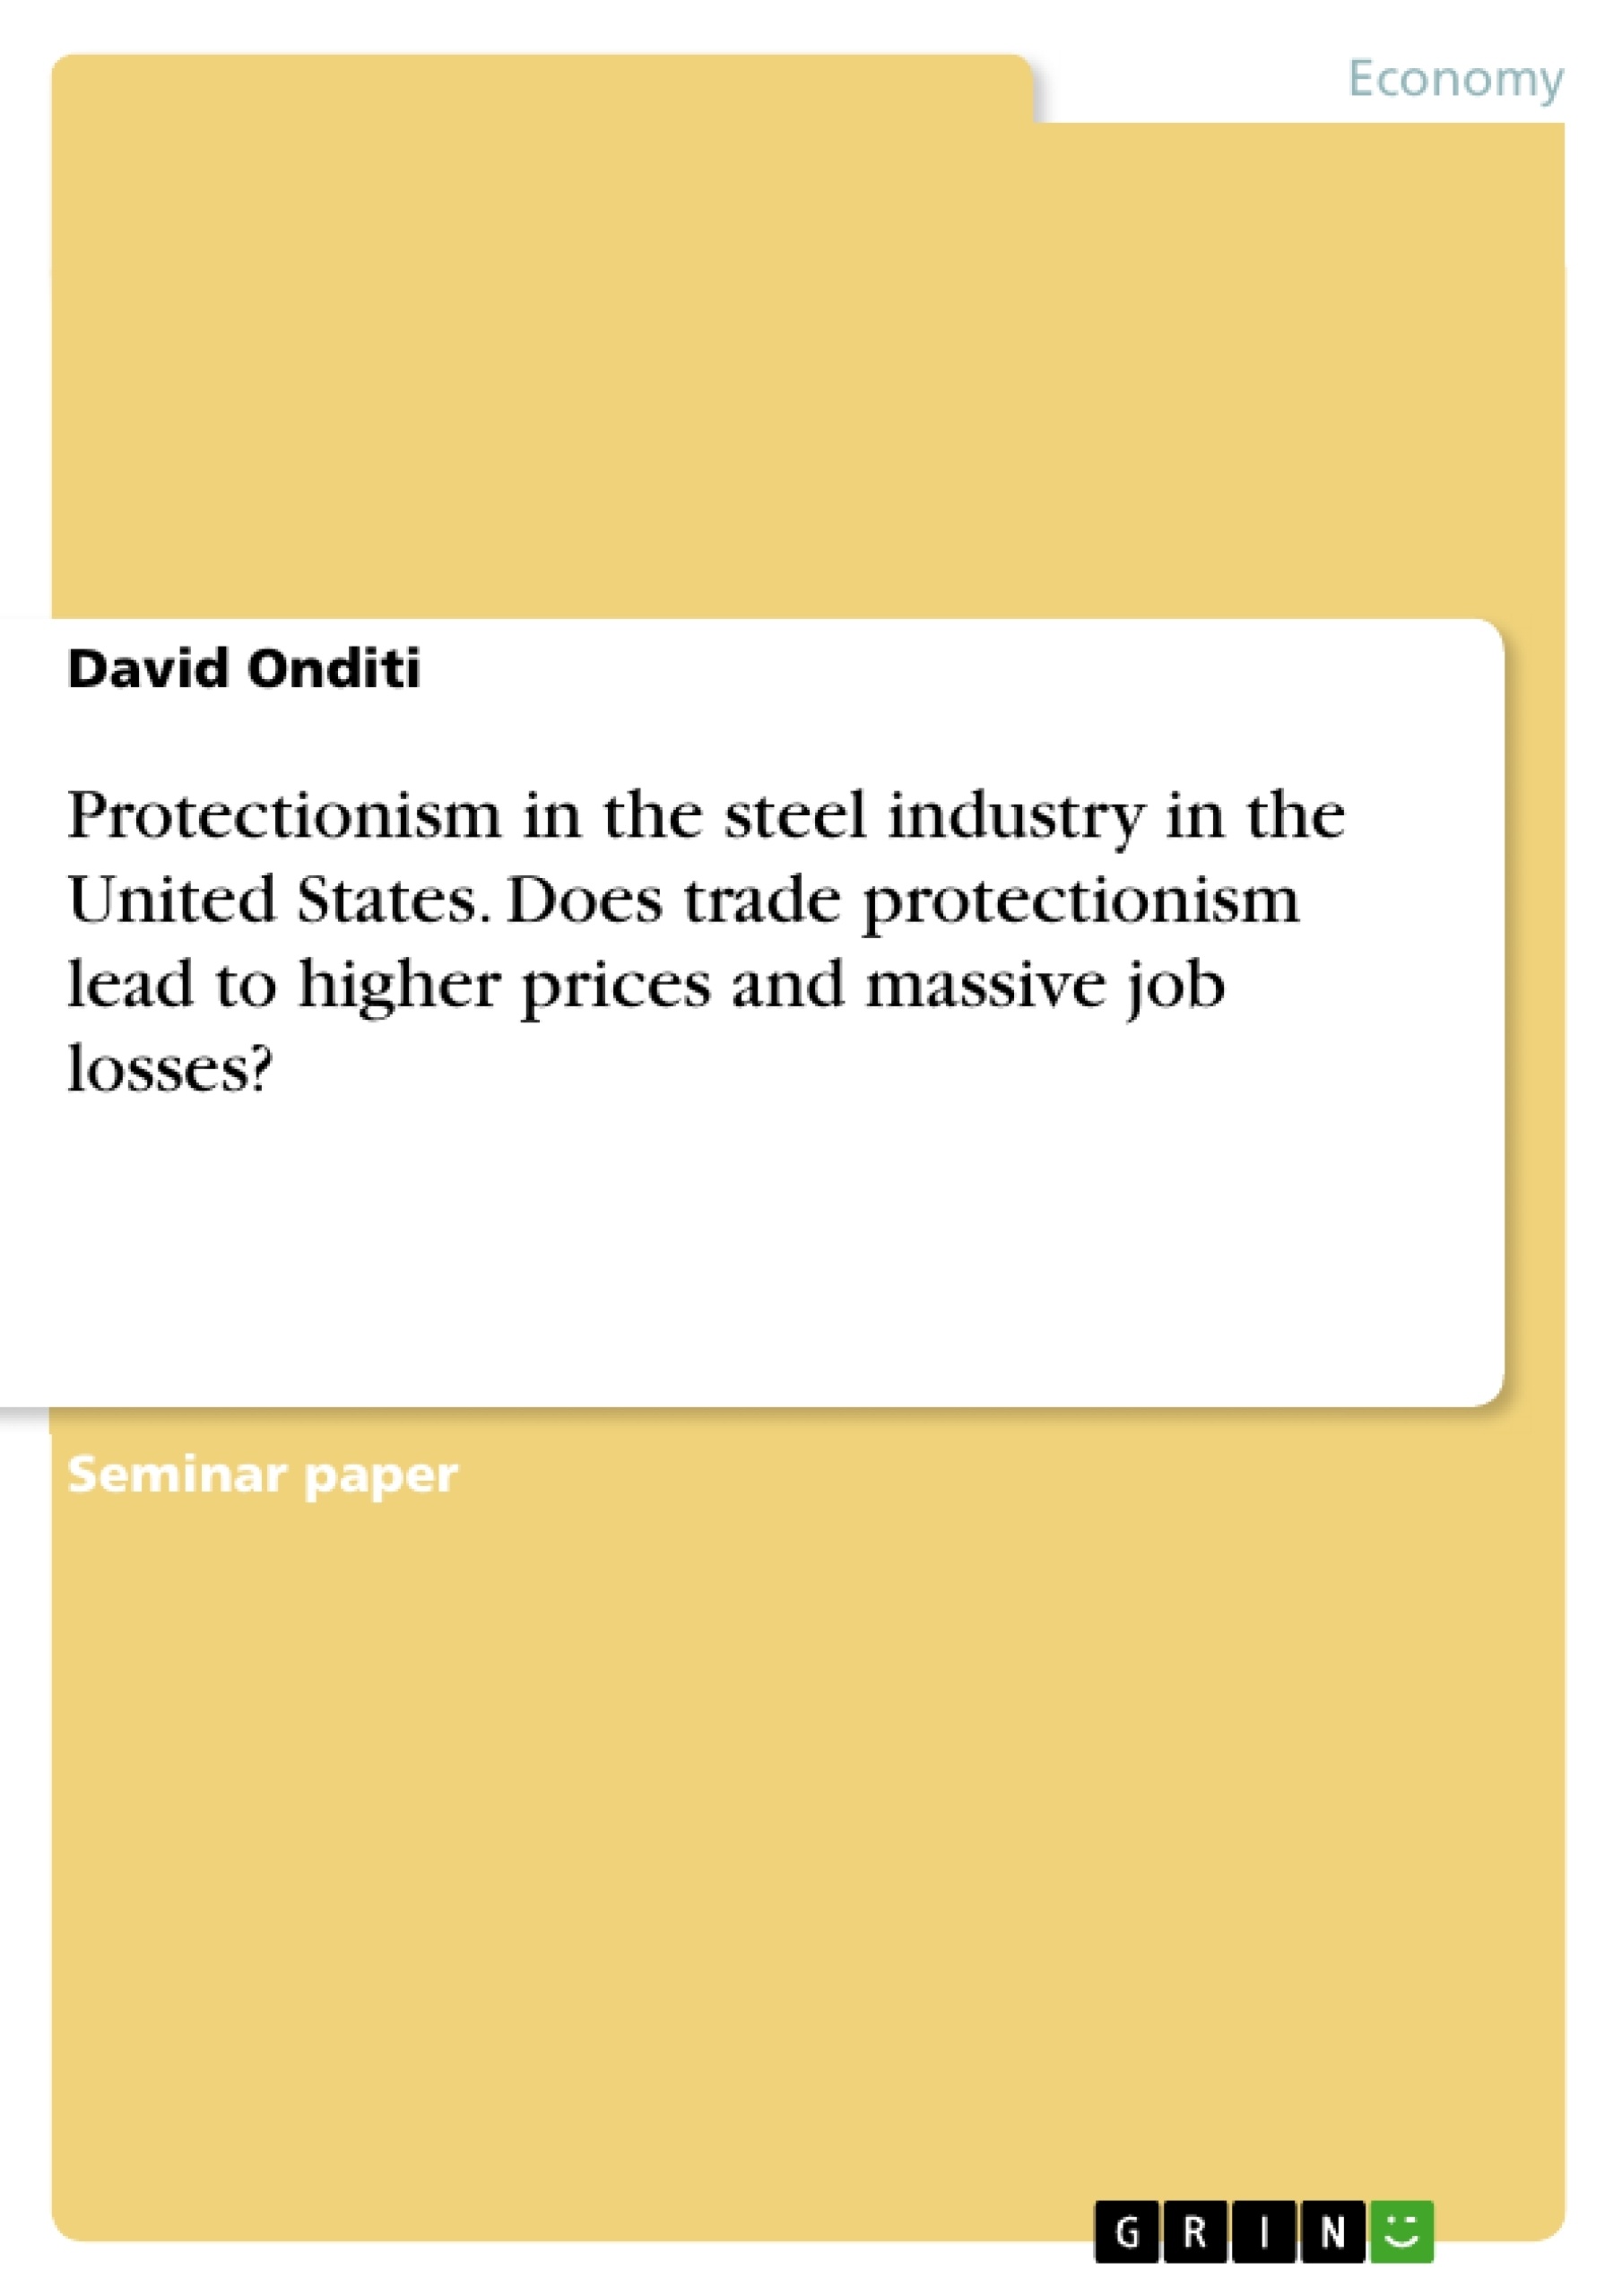 Titel: Protectionism in the steel industry in the United States. Does trade protectionism lead to higher prices and massive job losses?